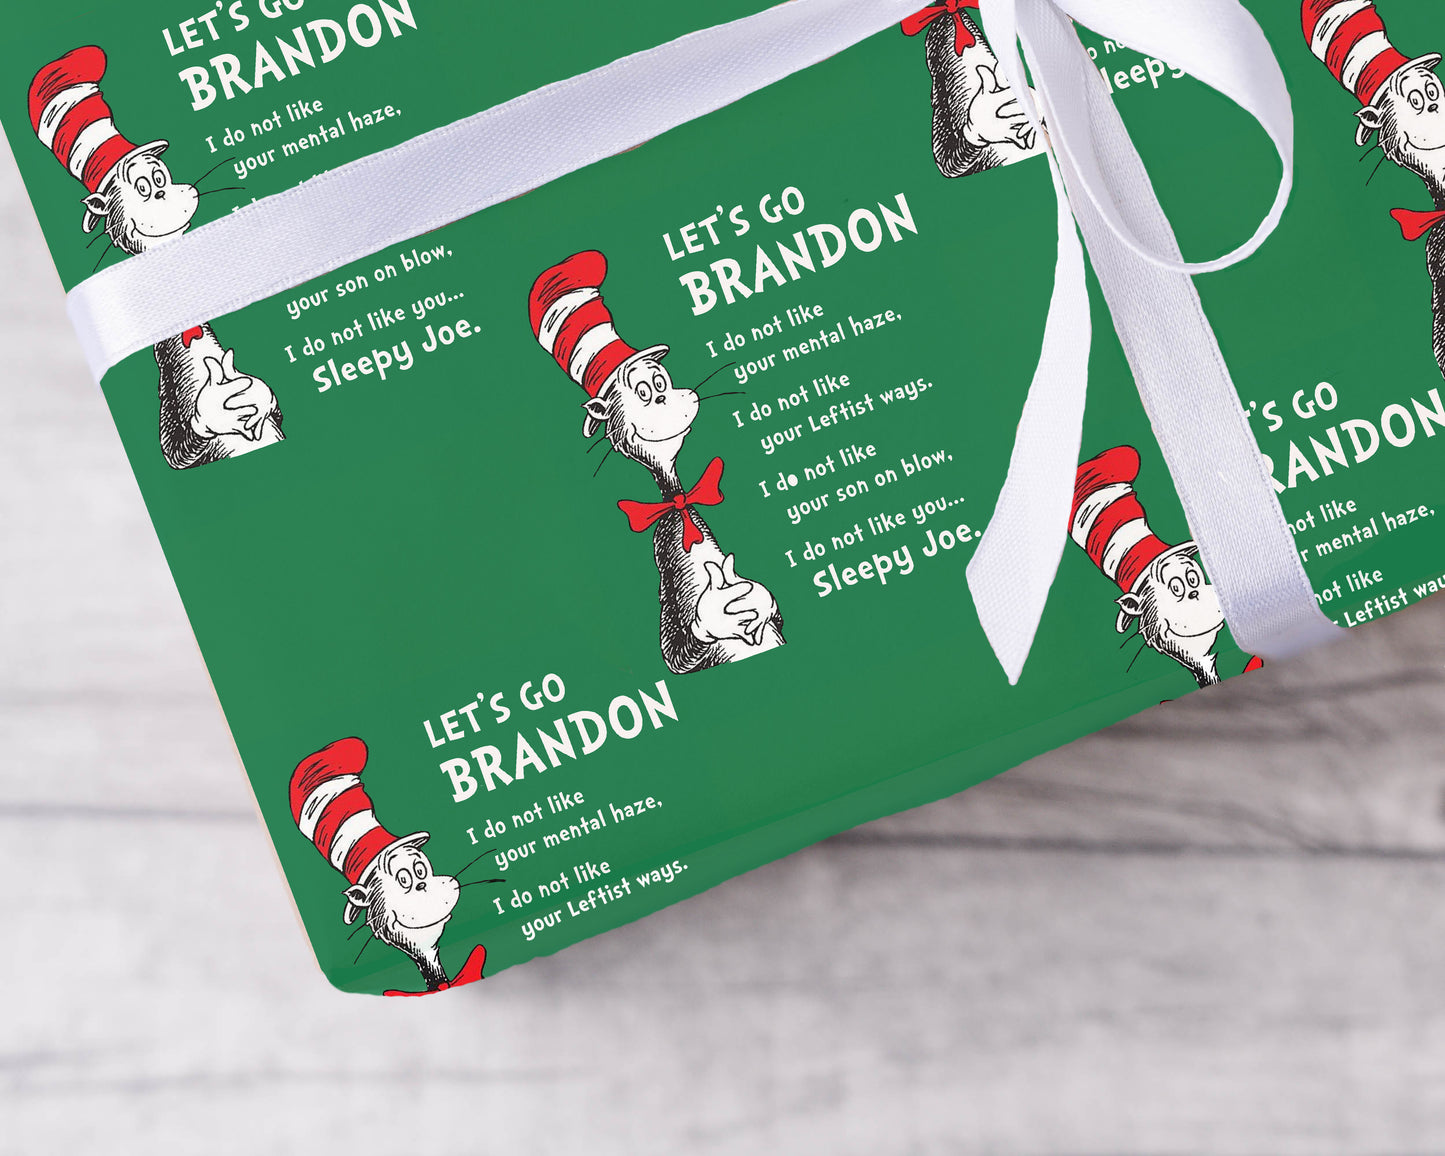 Let’s go Brandon Wrapping Paper